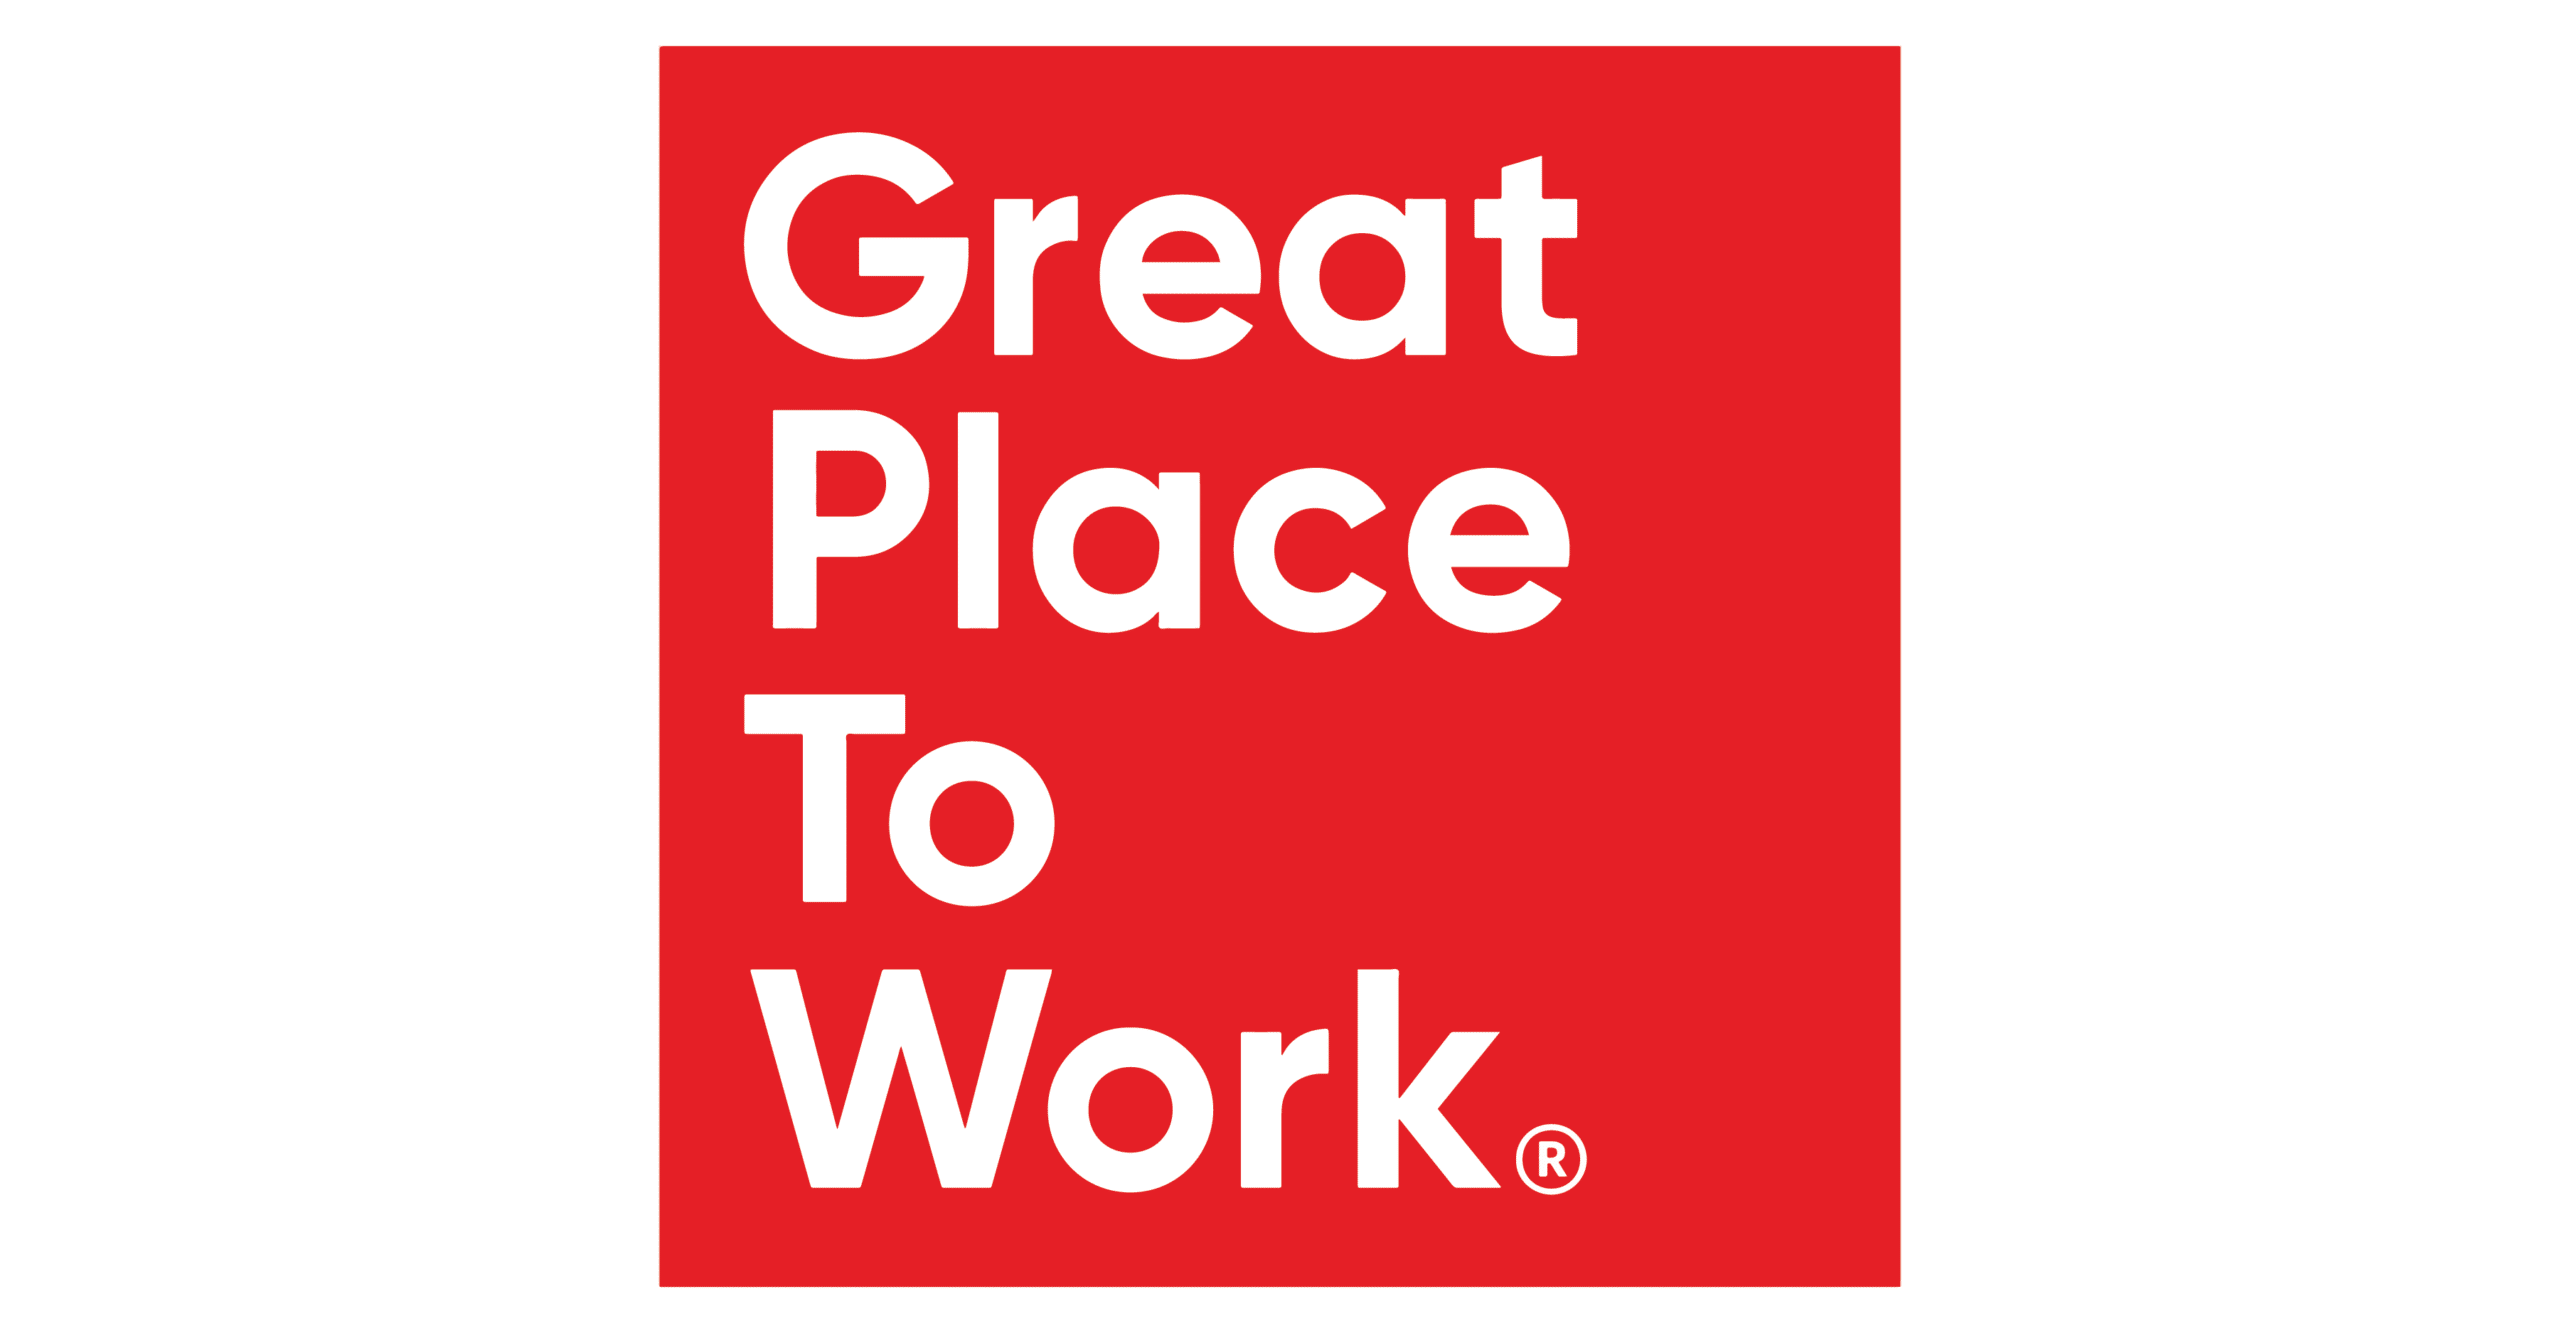 Great Place To Work Celebrates Assuras Addition To Their List Of Certified Companies